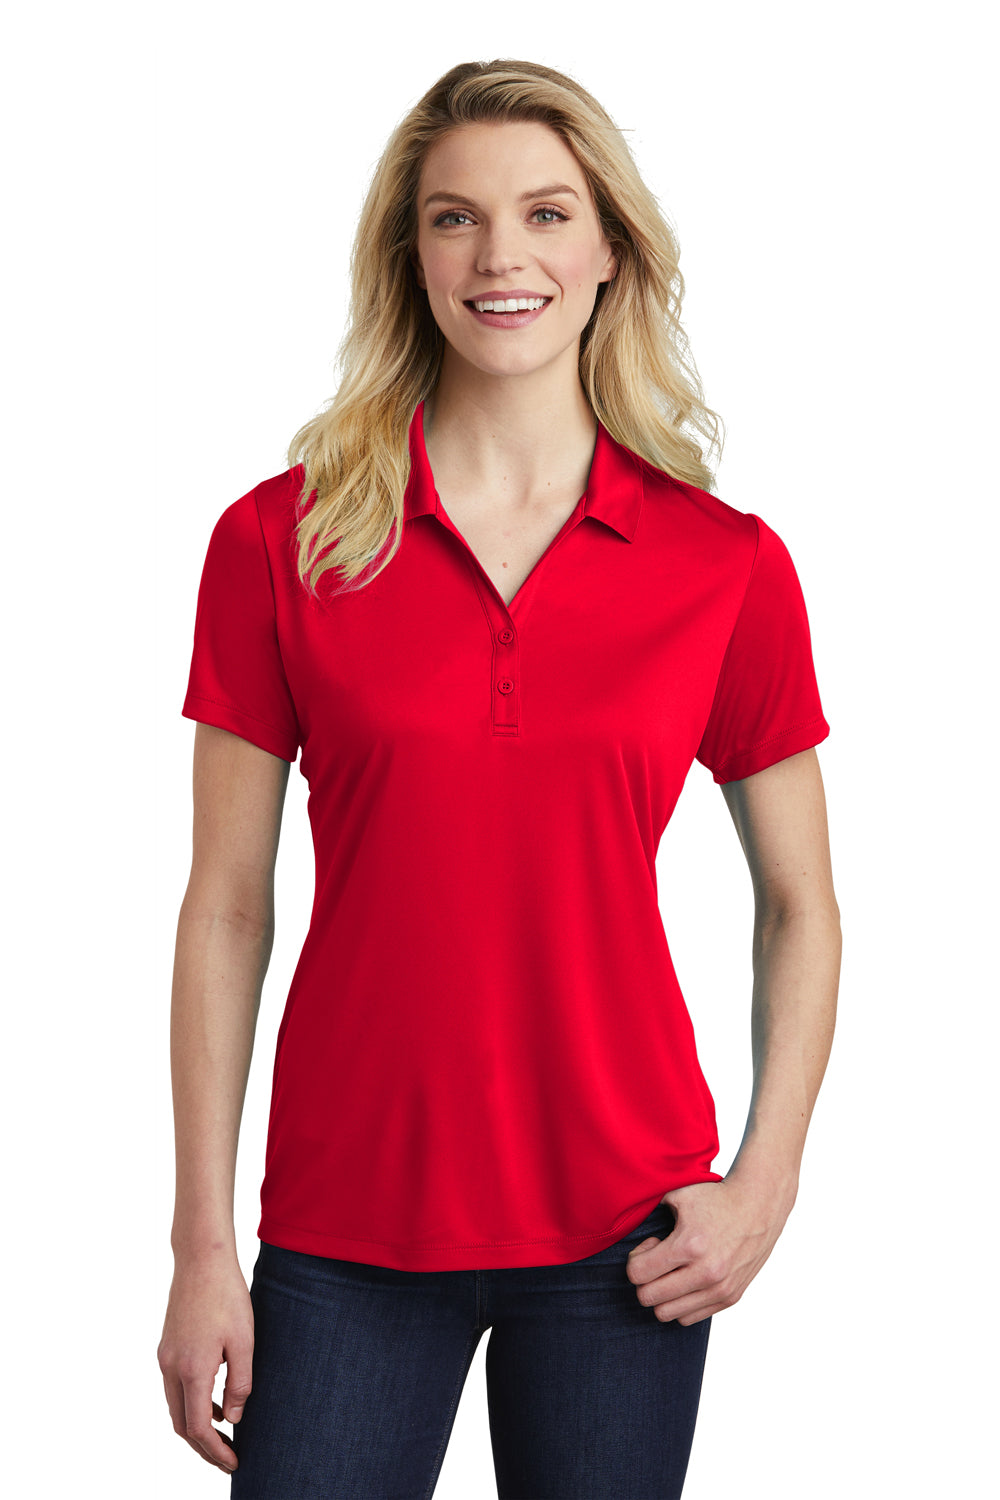 Rossignol Women's lightweight breathable polo shirt